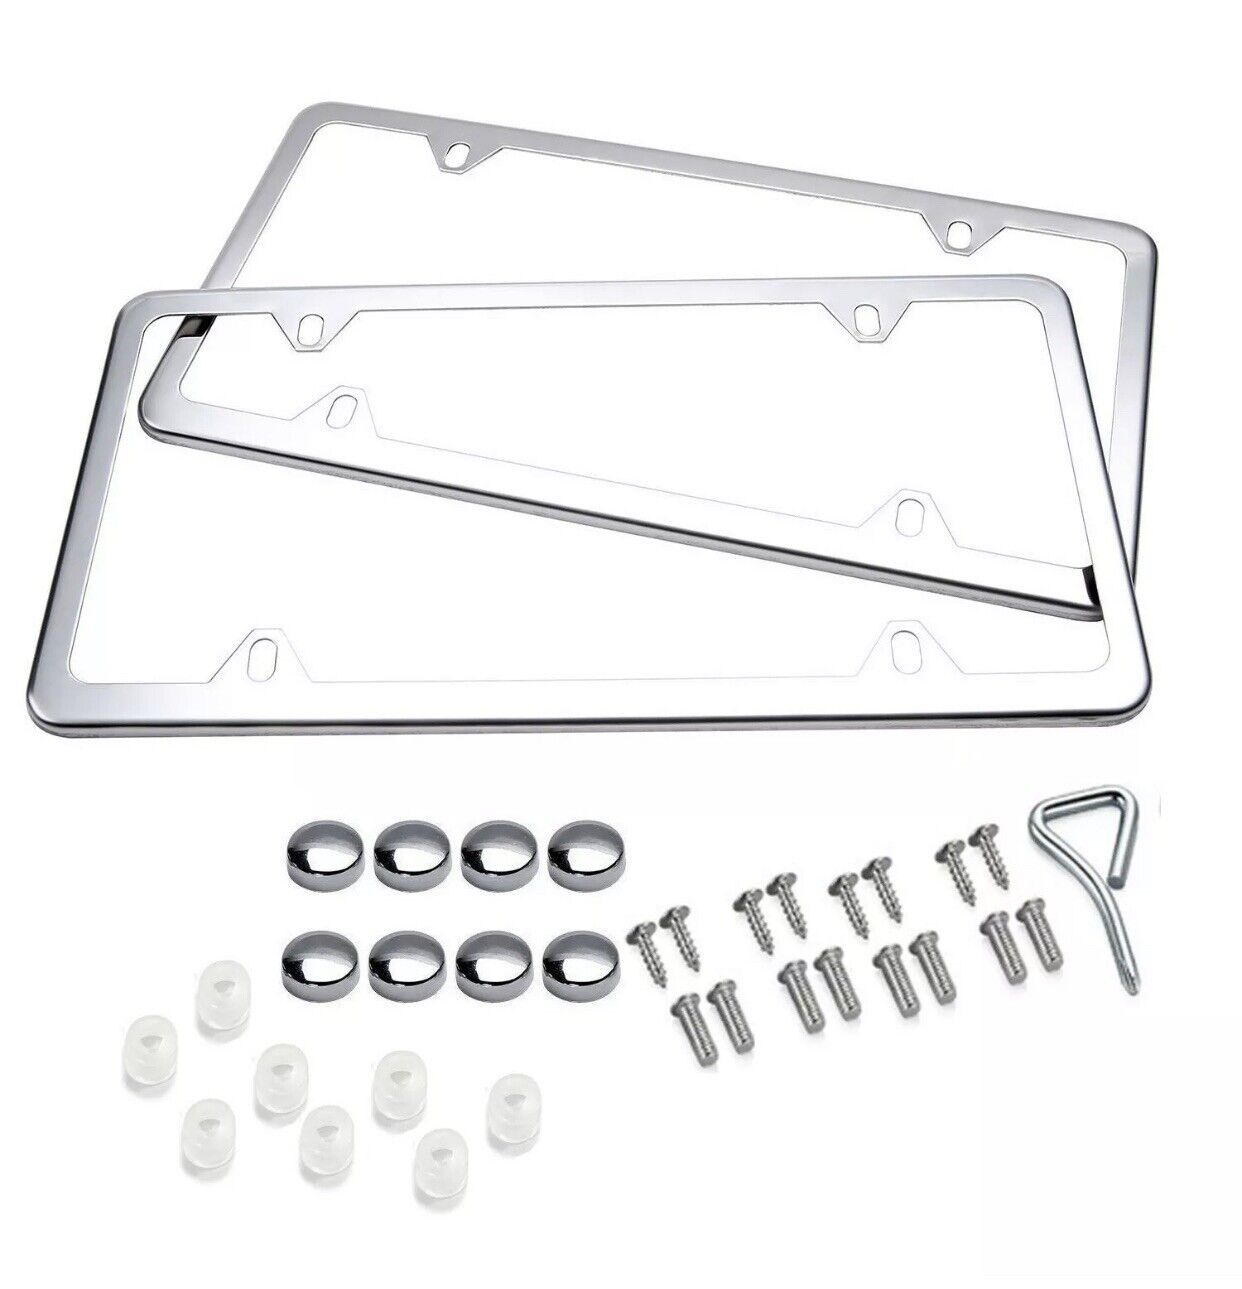 2pcs Silver Stainless Steel License Plate Frame Cover Front & Rear Kit Universal